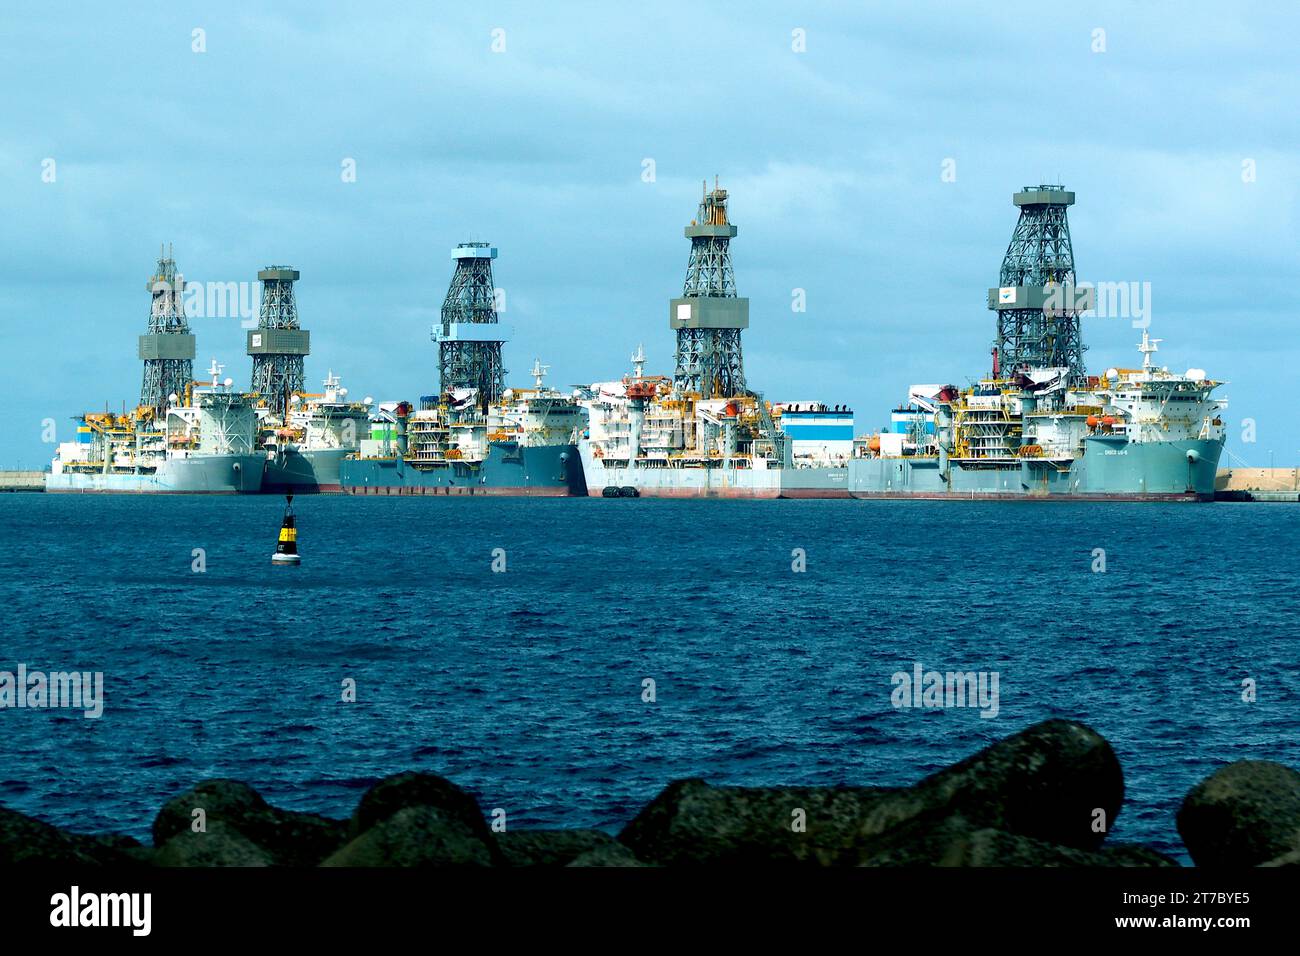 Drill ships await their next deployment at Las Palmas, Grand Canaria, L-R, Pacific Scirocco, Pacific Meltem, Valaris  DS-9, Ensco DS-7, Ensco DS-8. Stock Photo